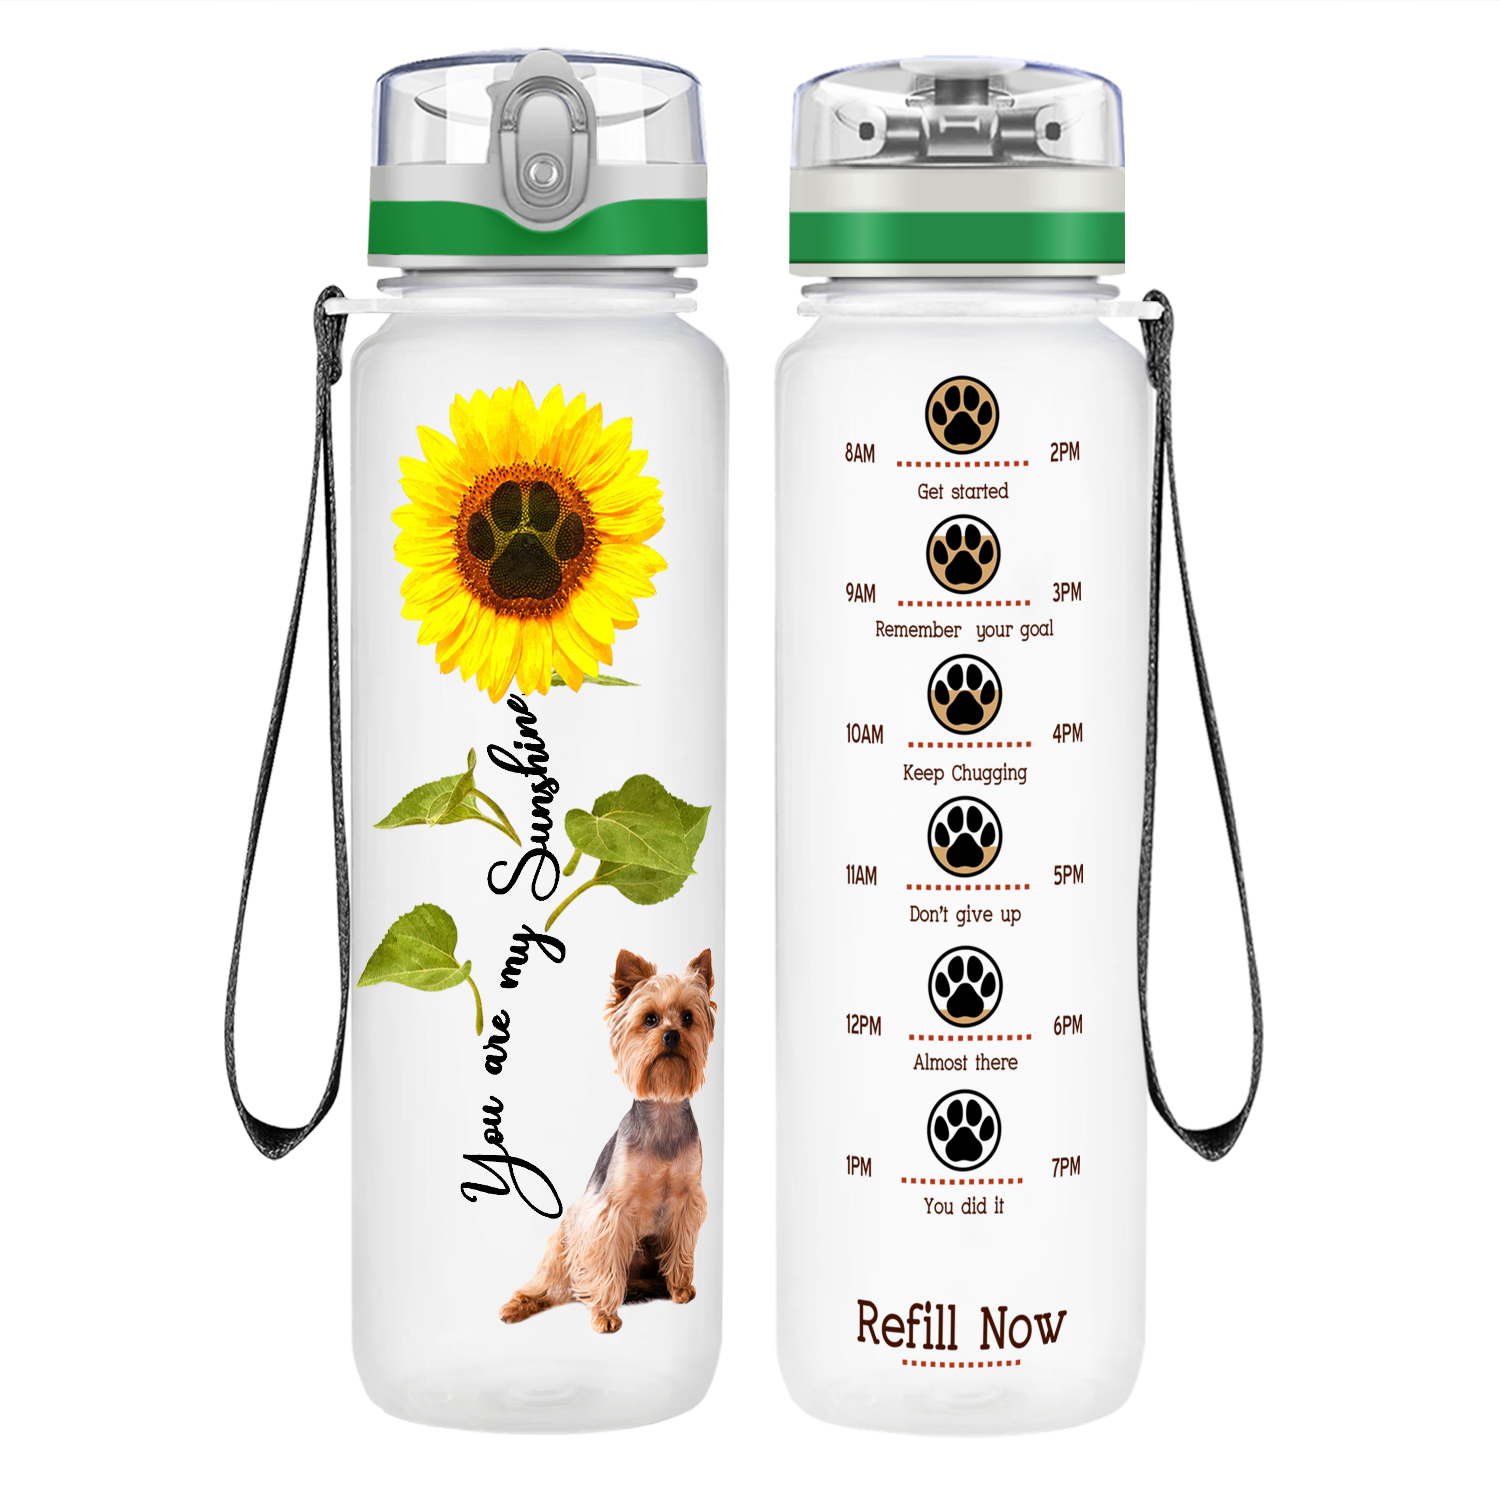 You are my Sunshine Yorkshire Terrier on 32 oz Motivational Tracking Water Bottle